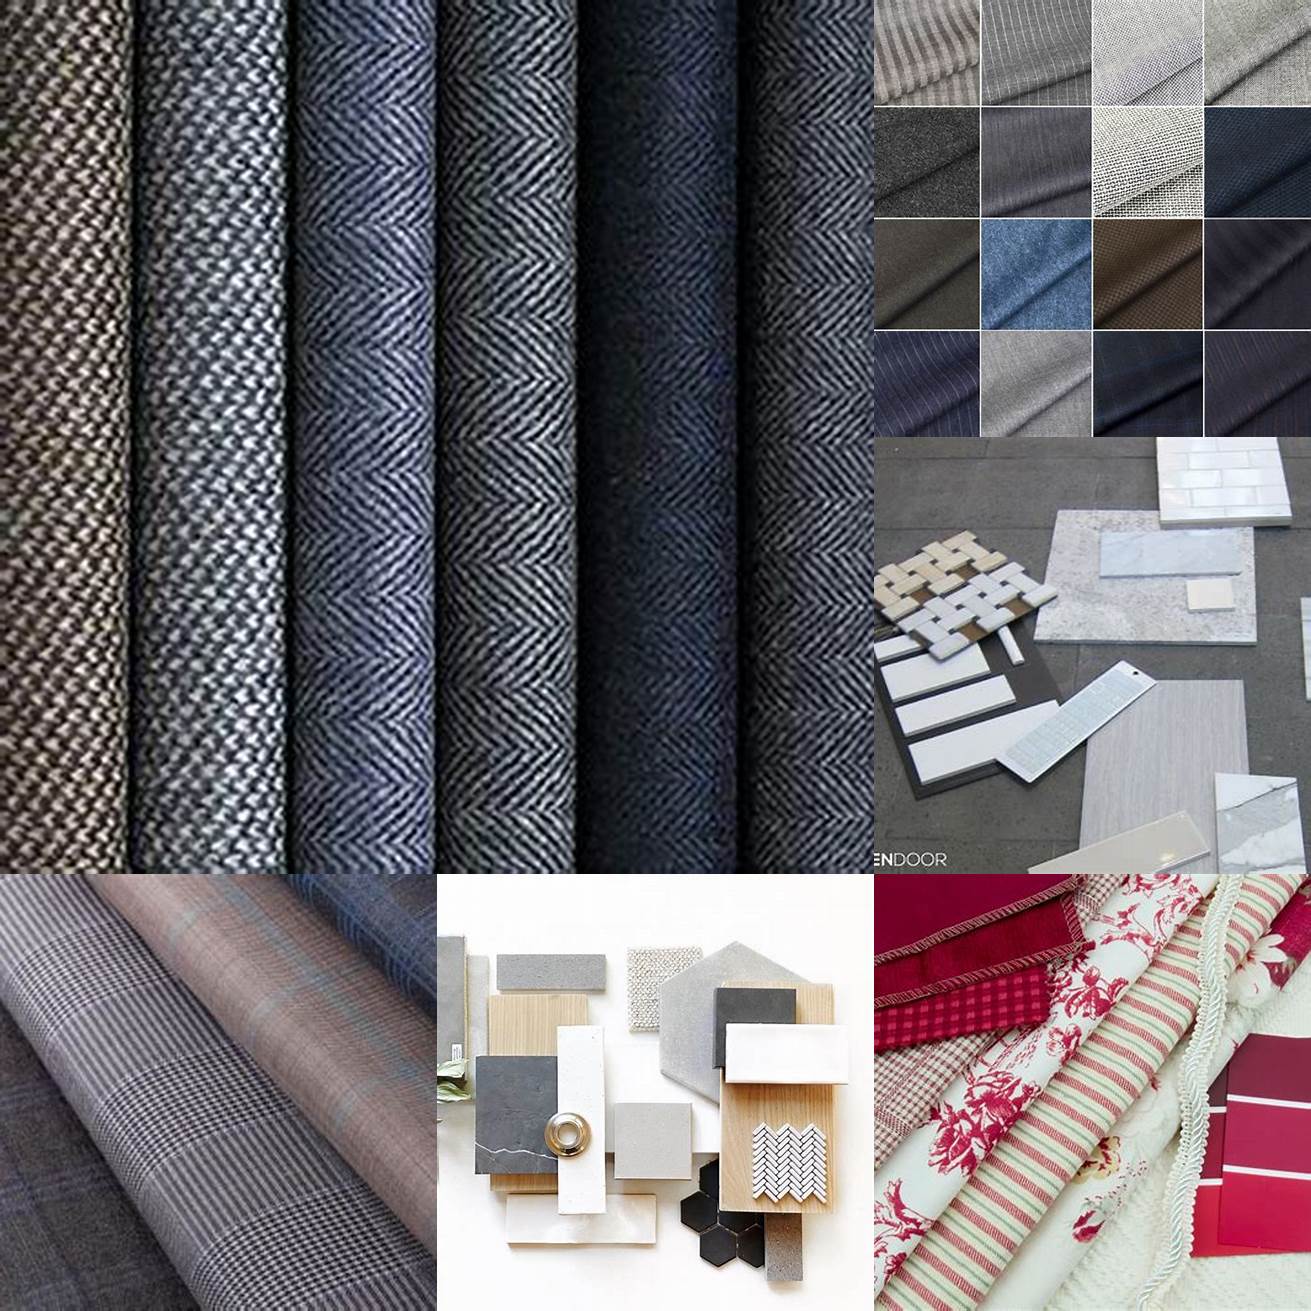 Material Choose a material that suits your taste and budget